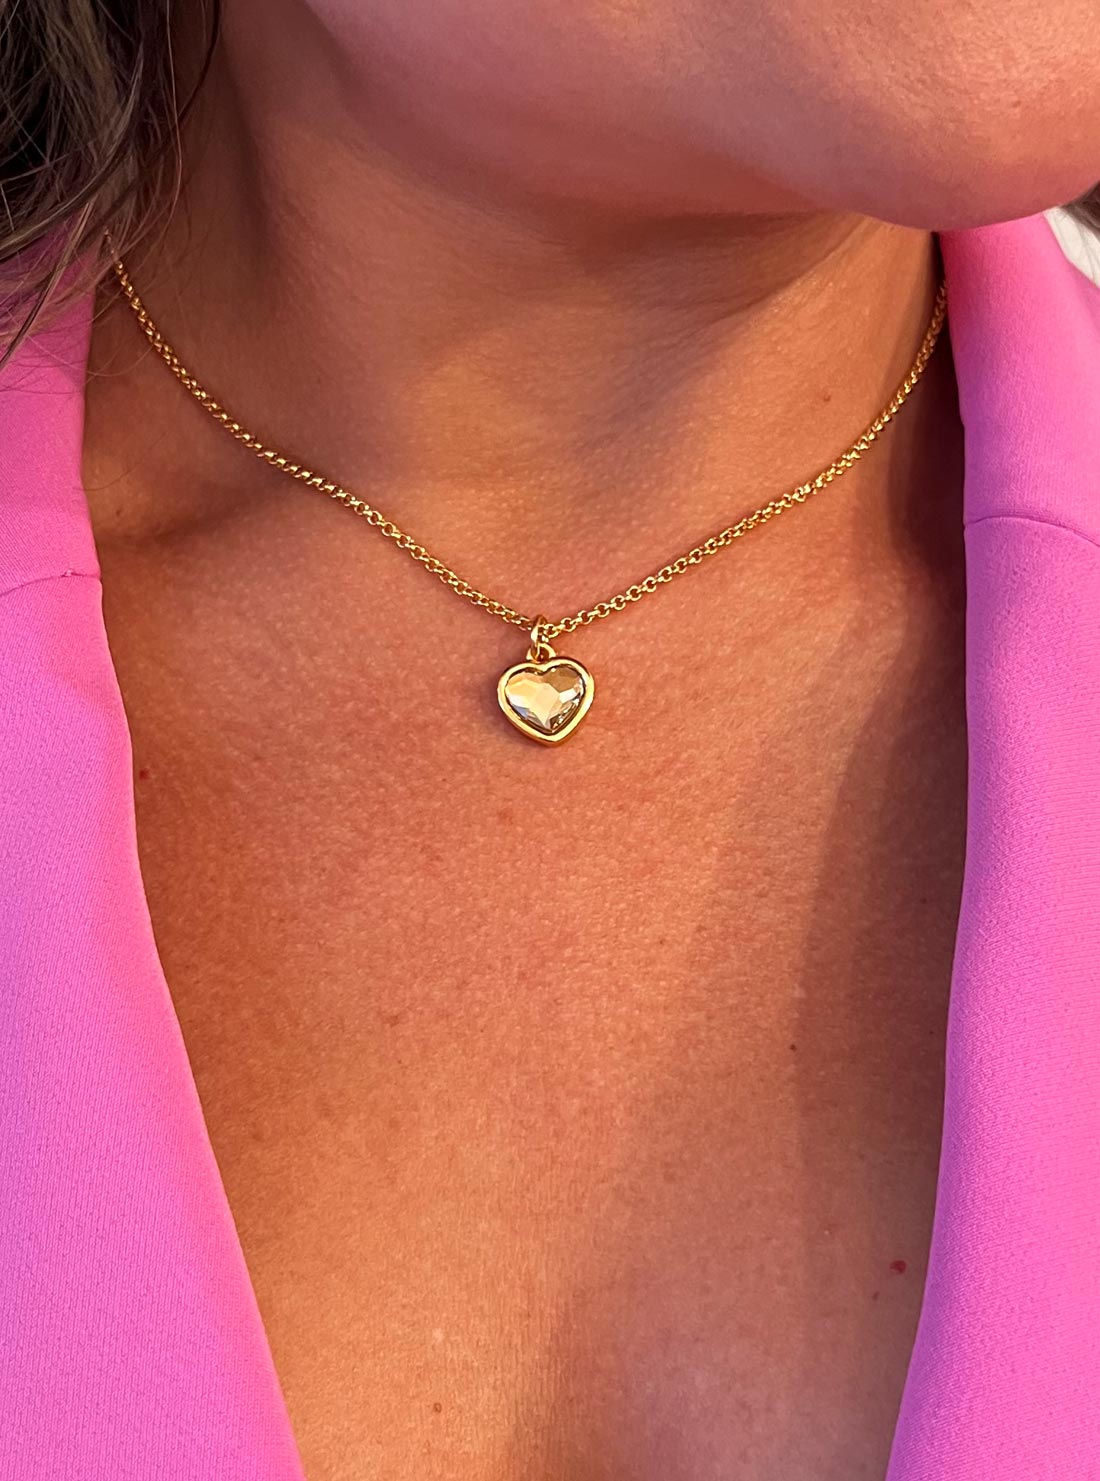 Truly love necklace gold